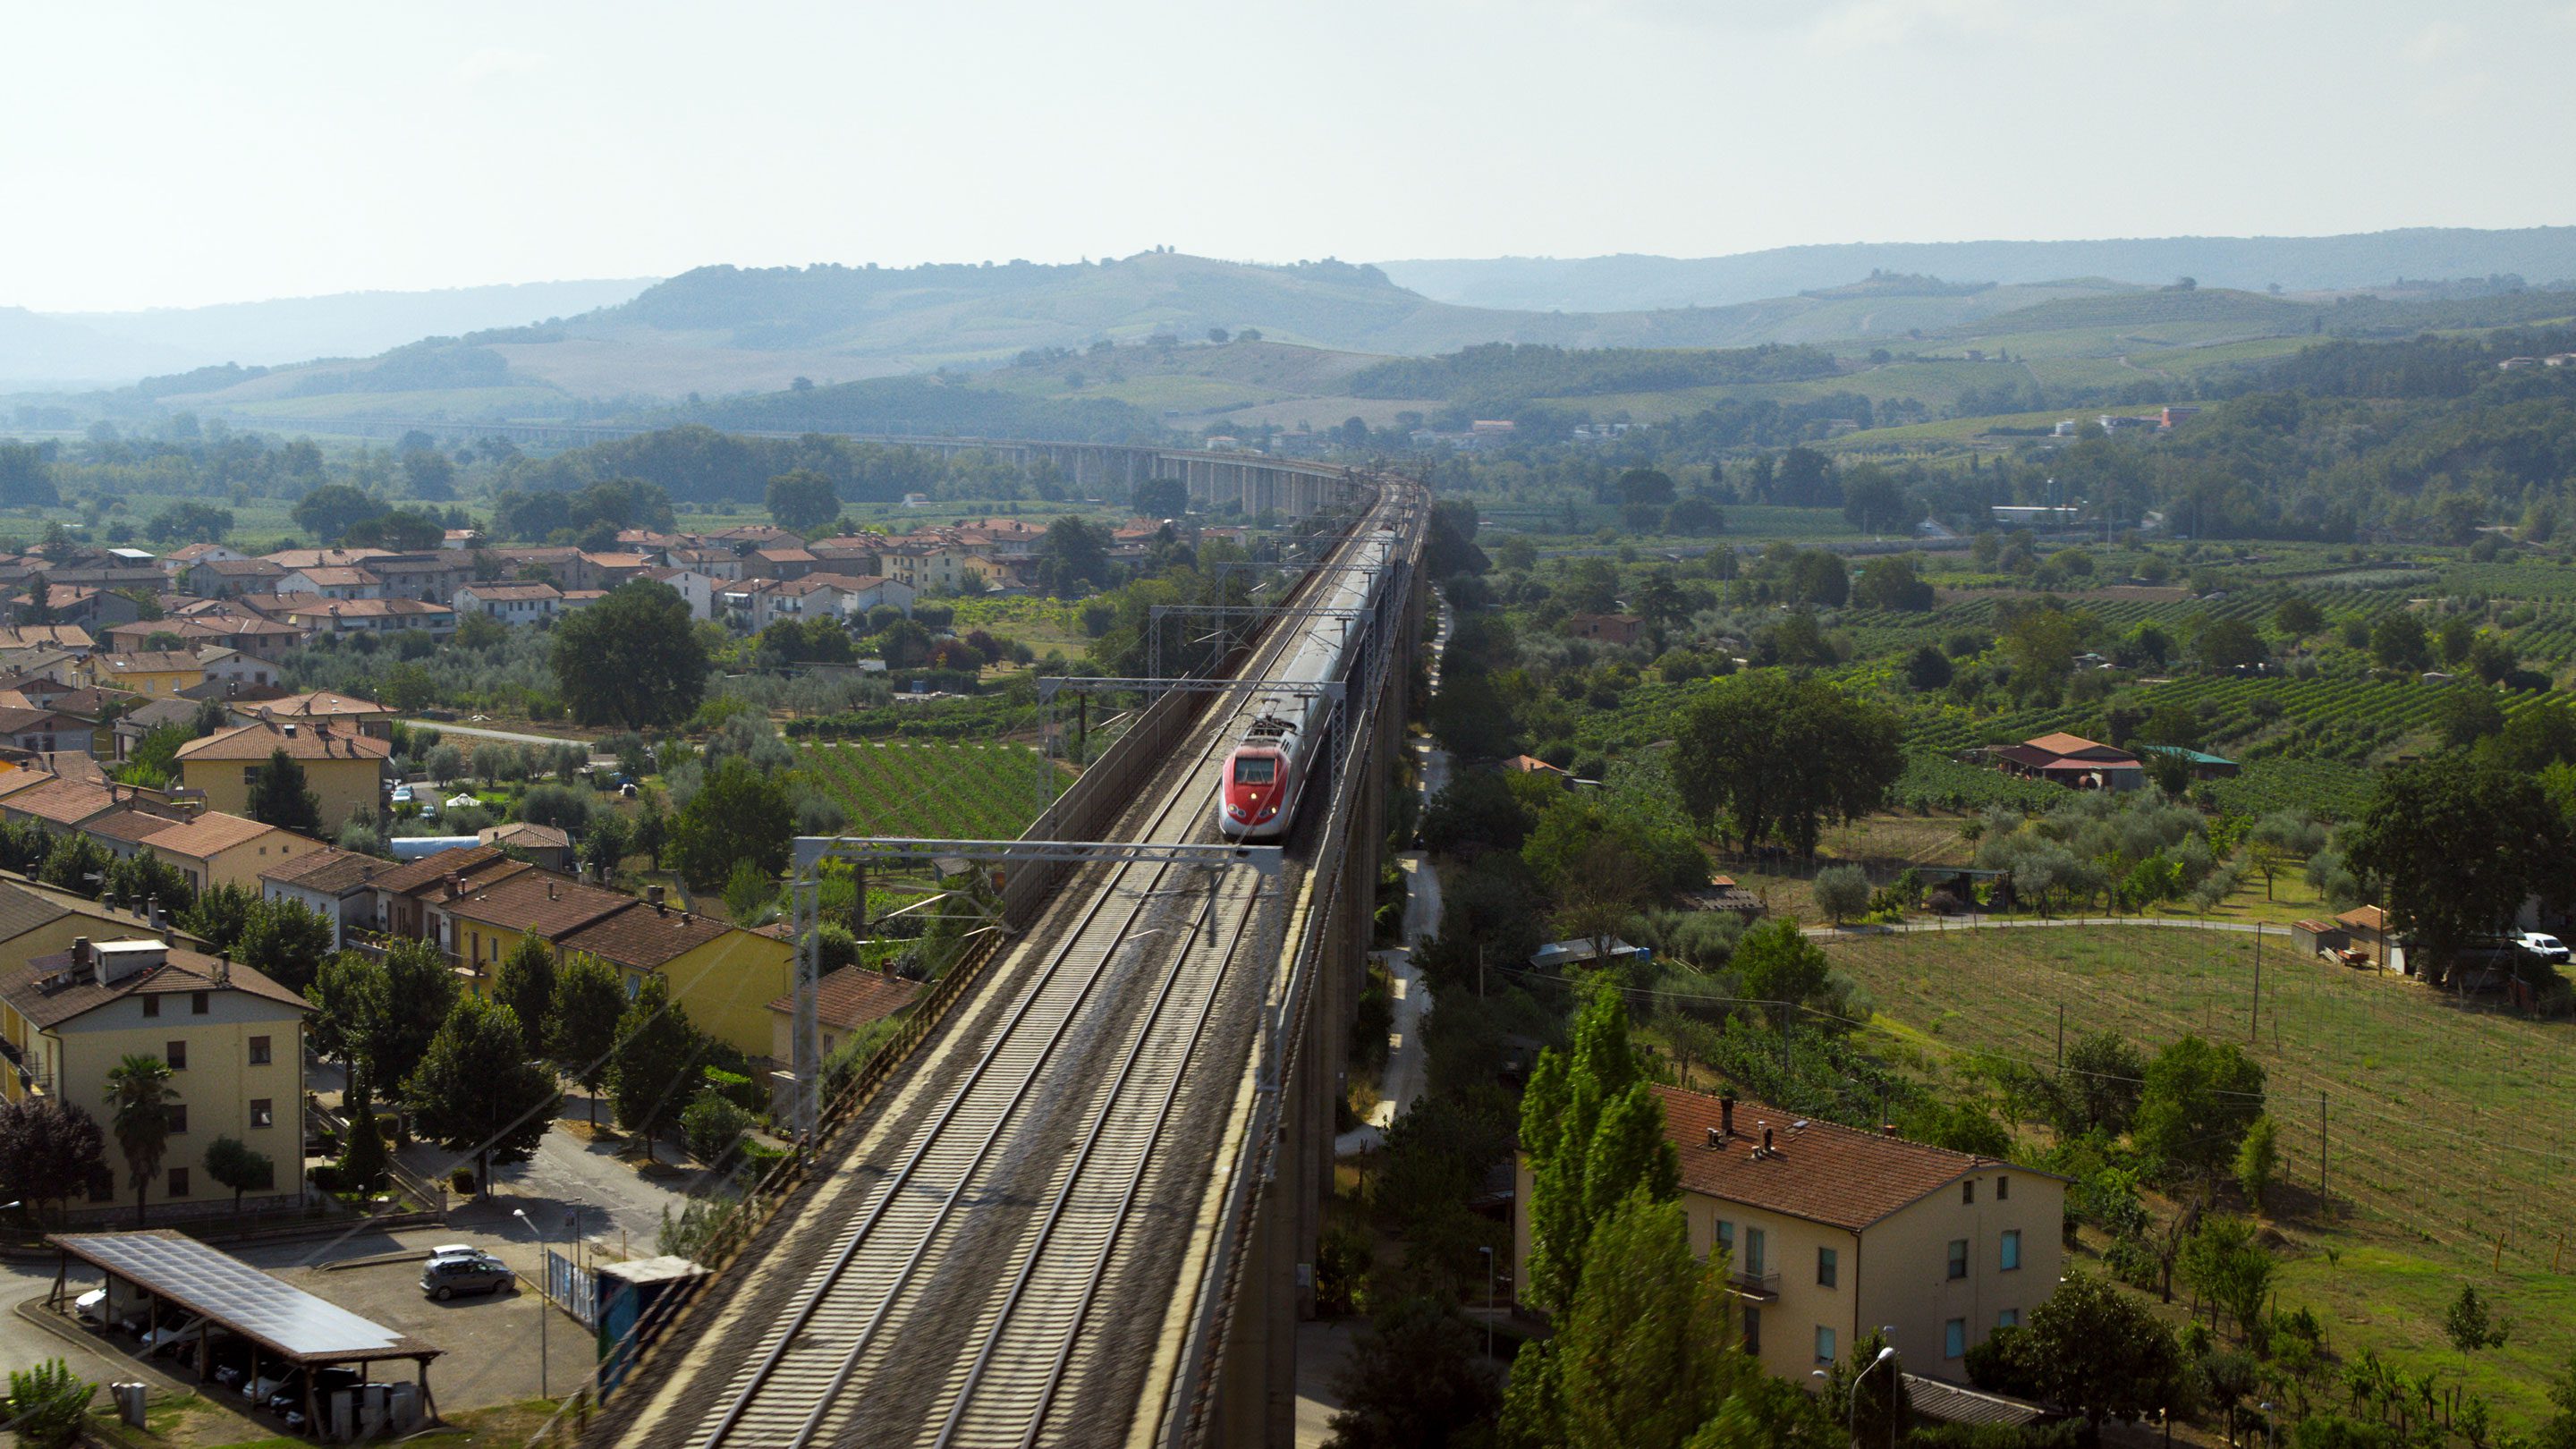 A high-speed train travelling on a track through the Italian countryside. Icomera's SureWAN technology allows its mobile connectivity and applications routers to intelligently connect to multiple cellular and other communications networks simultaneously, aggregating all available capacity to deliver the fastest, most reliable connection possible to a moving vehicle.